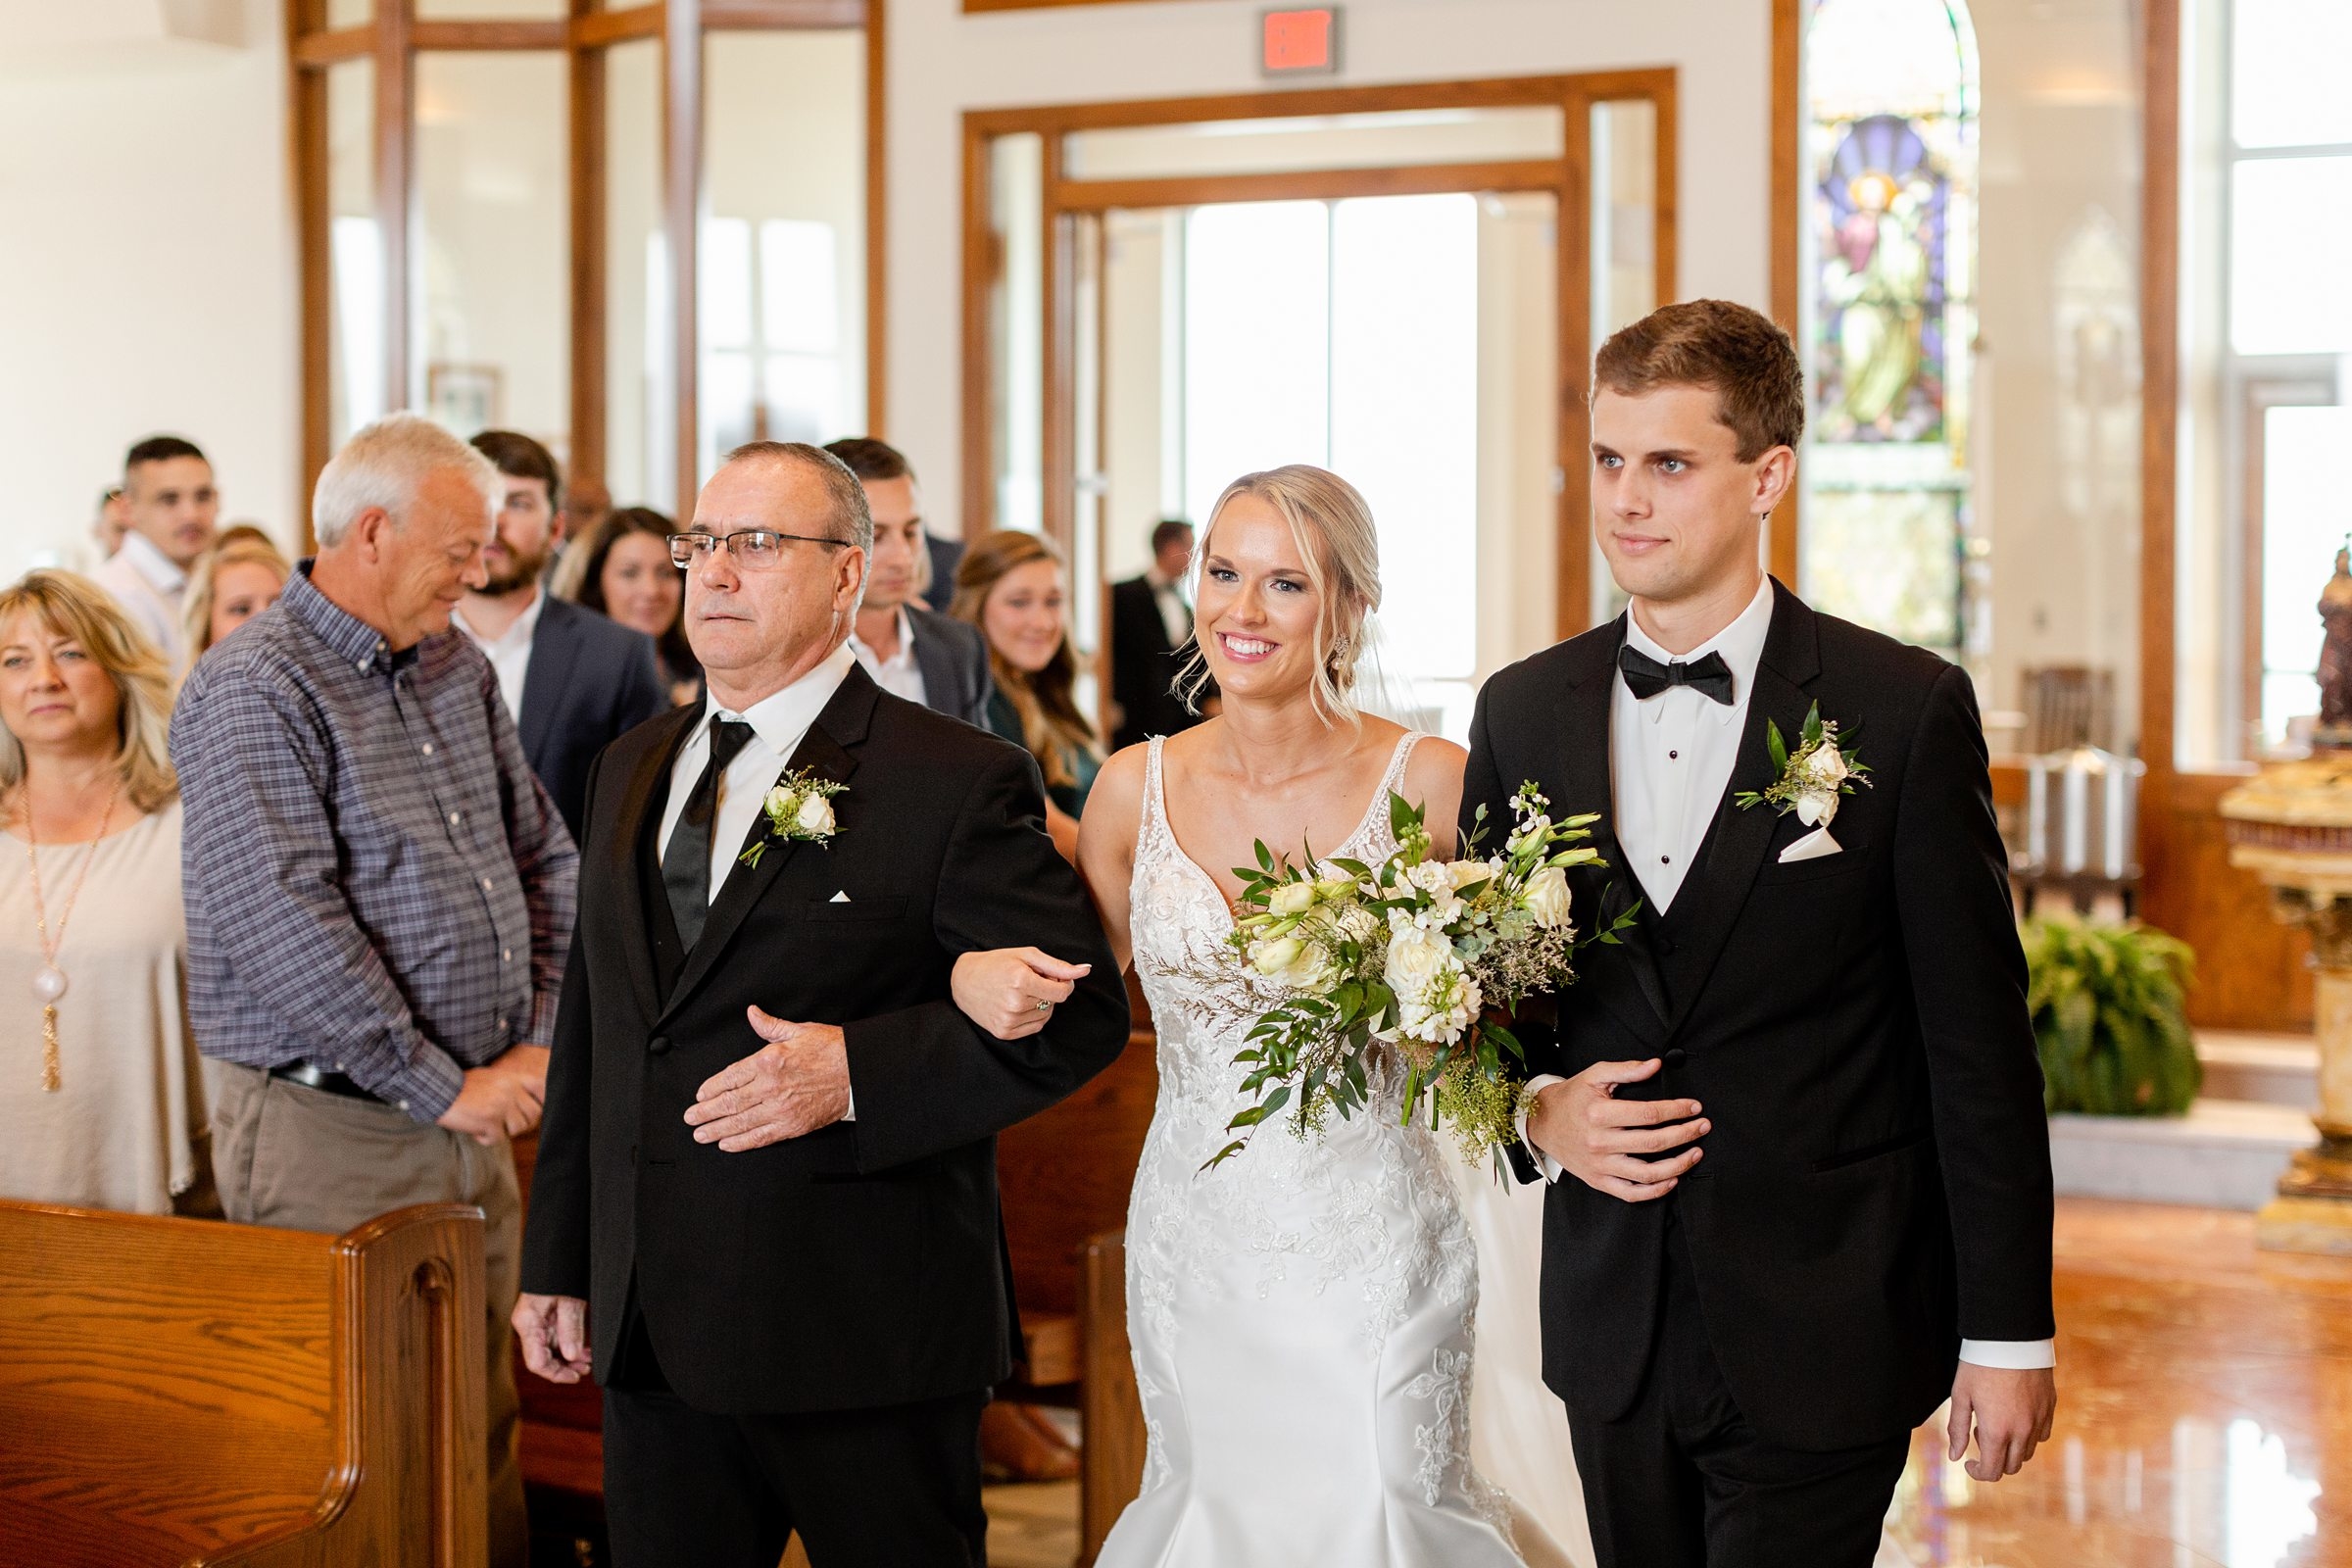 Hannah and Cody's Wedding in Booneville, IN137.jpg